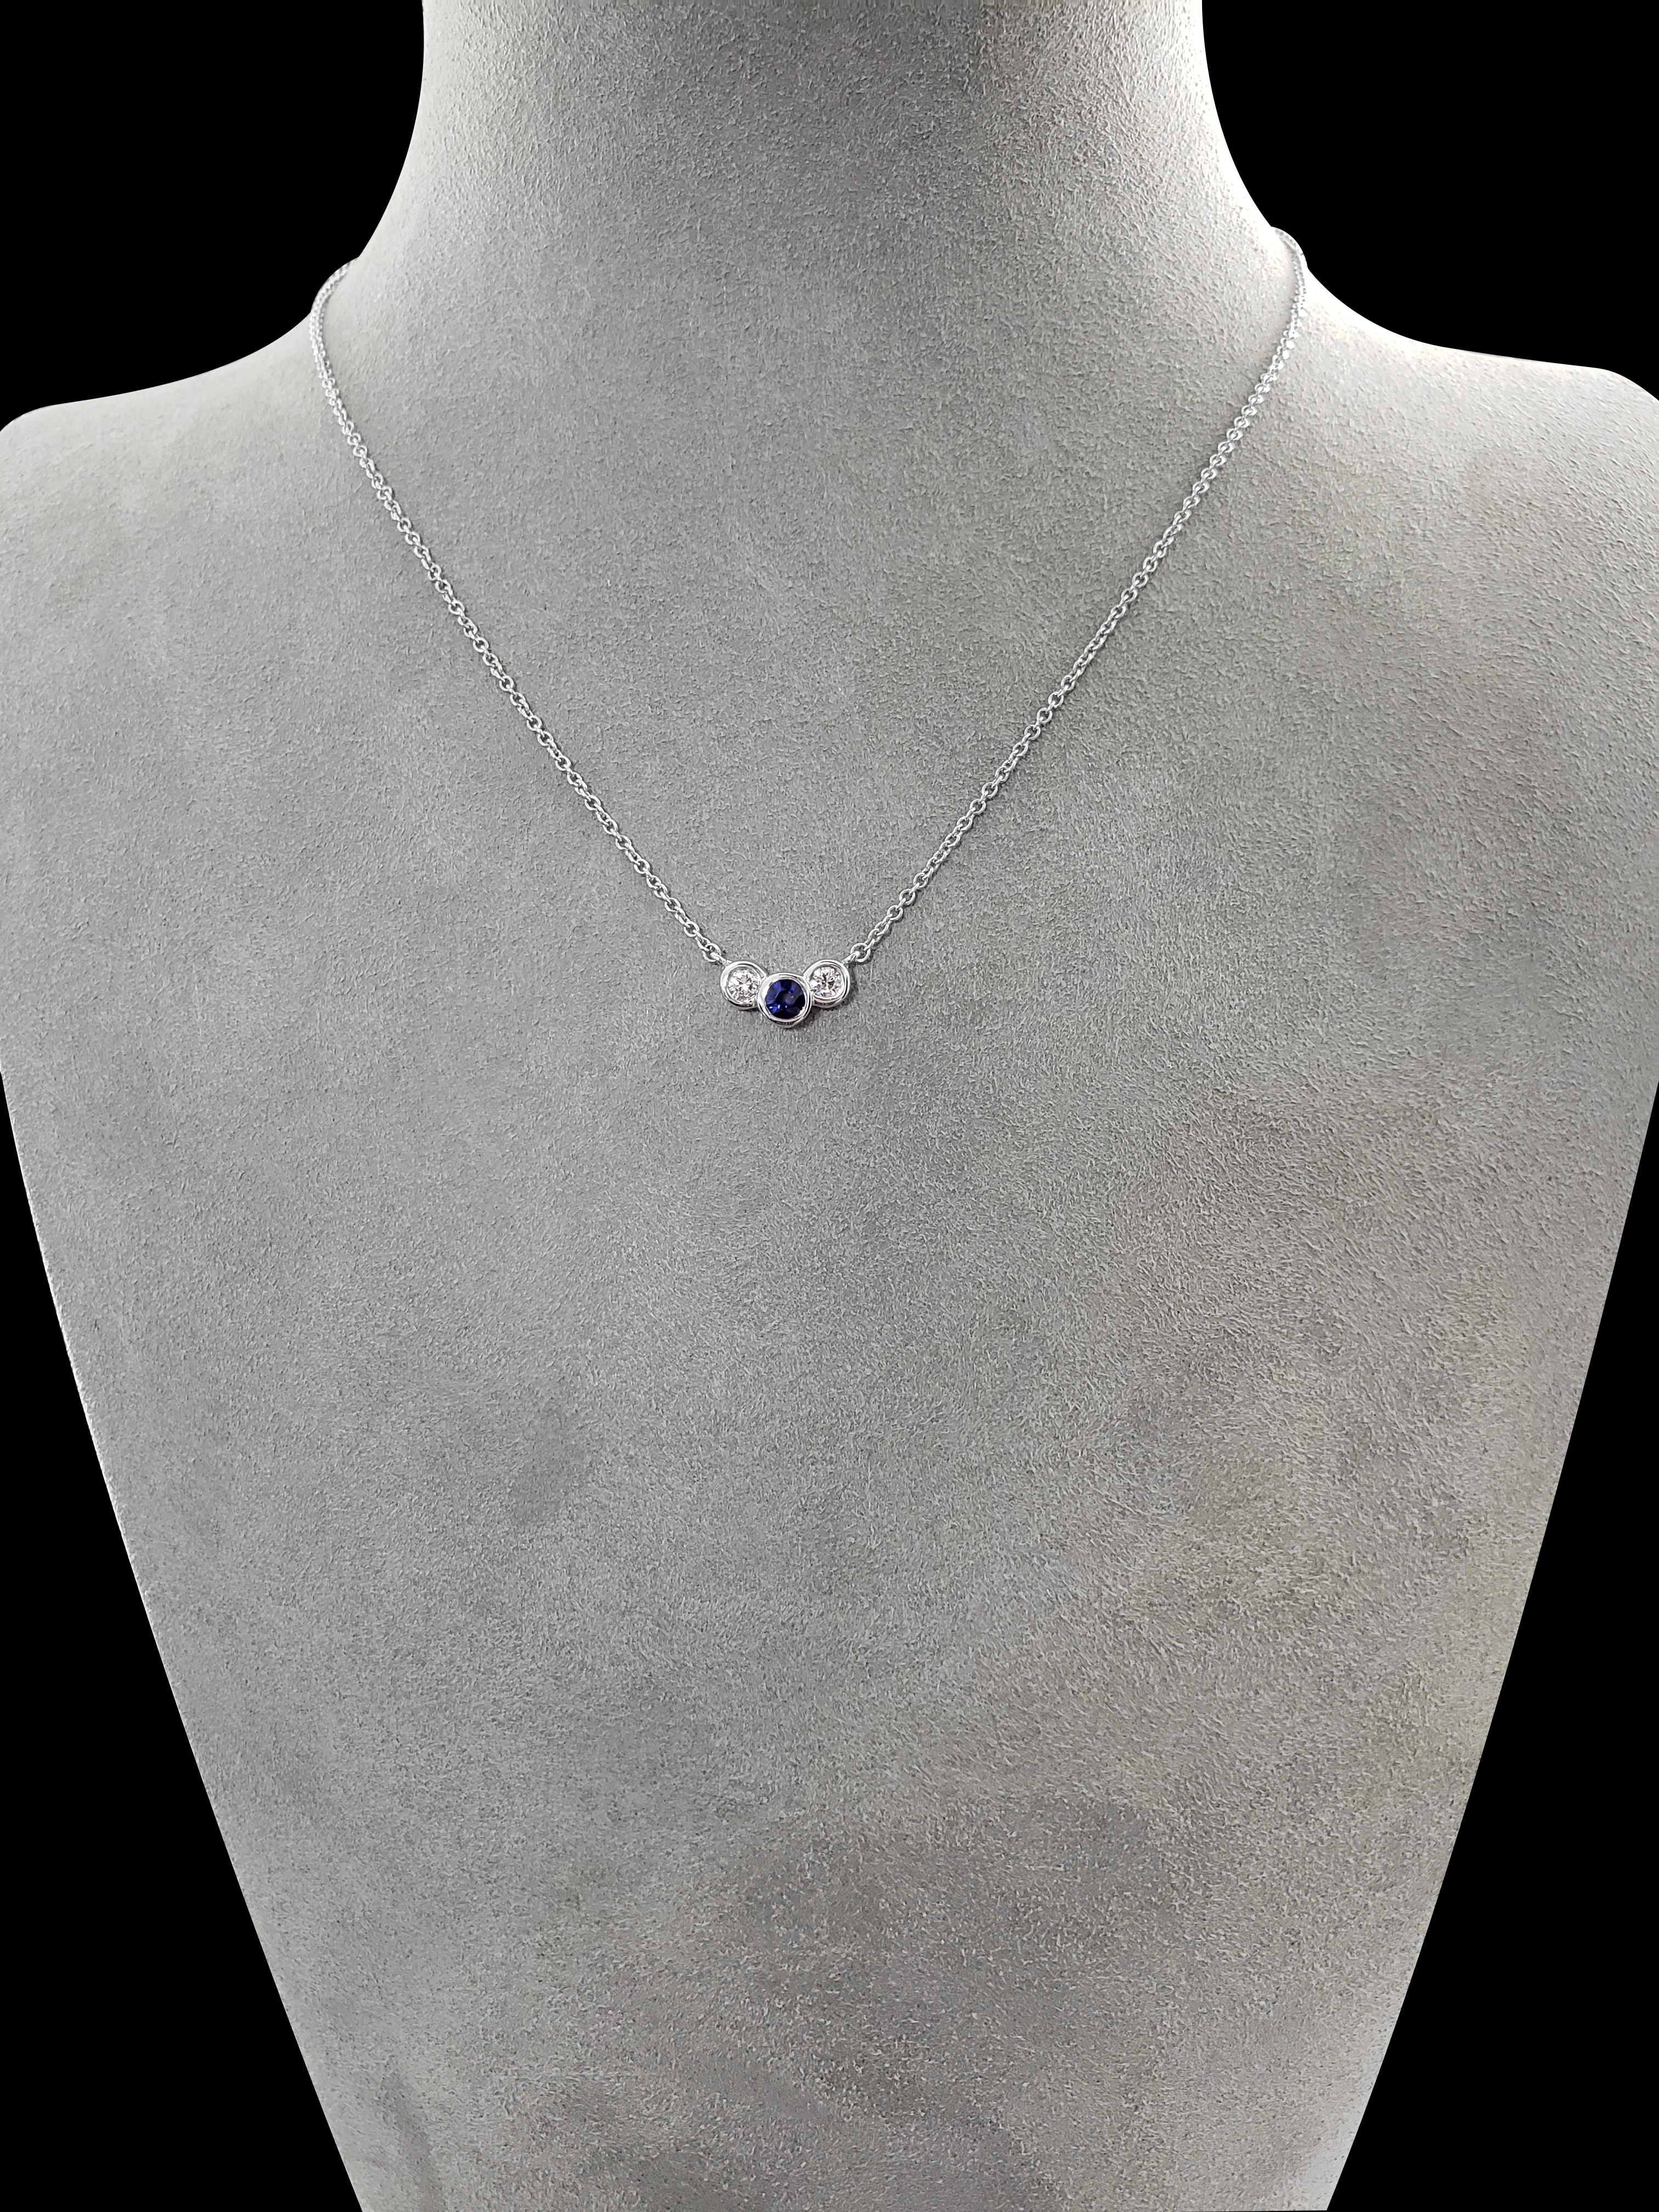 A simple and versatile pendant necklace showcasing a 0.31 carat blue sapphire center flanked by 2 brilliant round diamonds weighing 0.23 carats total. Each stone is bezel set in 18 karat white gold. Suspended on a 16 inch white gold chain